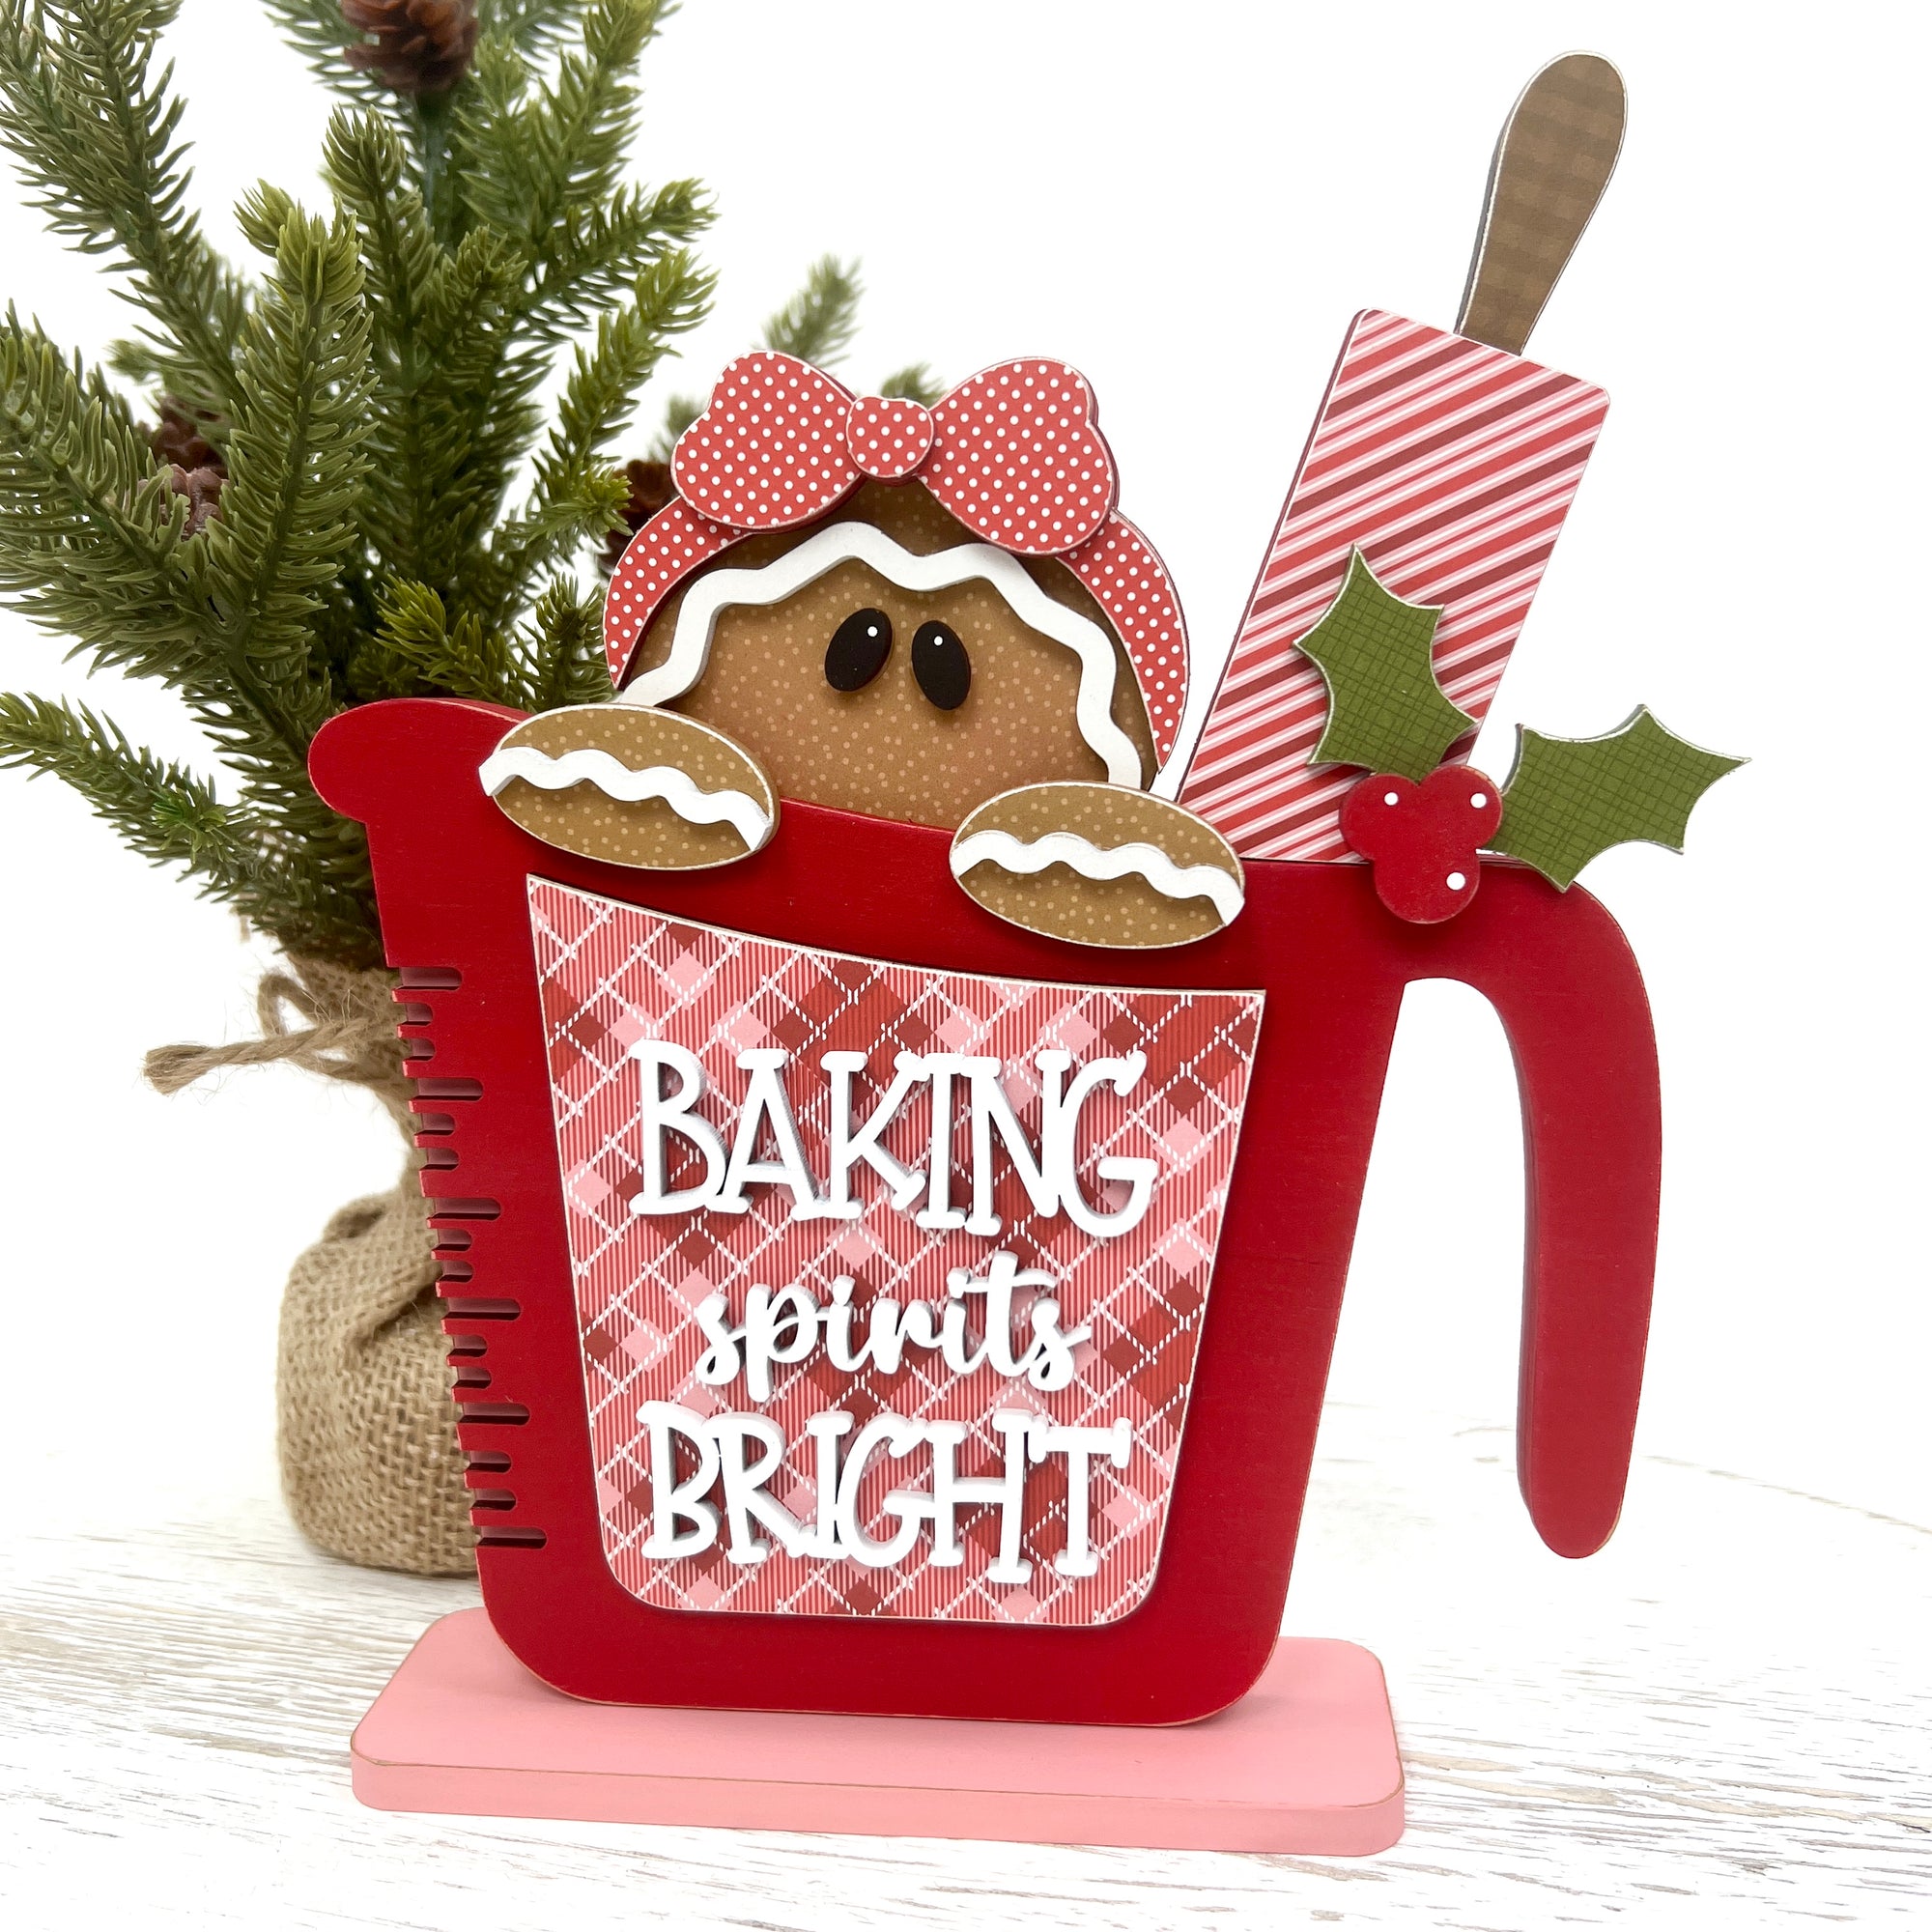 Gingerbread wood decor craft kit. Measuring cup with a gingerbread girl and candy cane striped rolling pin inside. Front says Baking Spirits Bright.